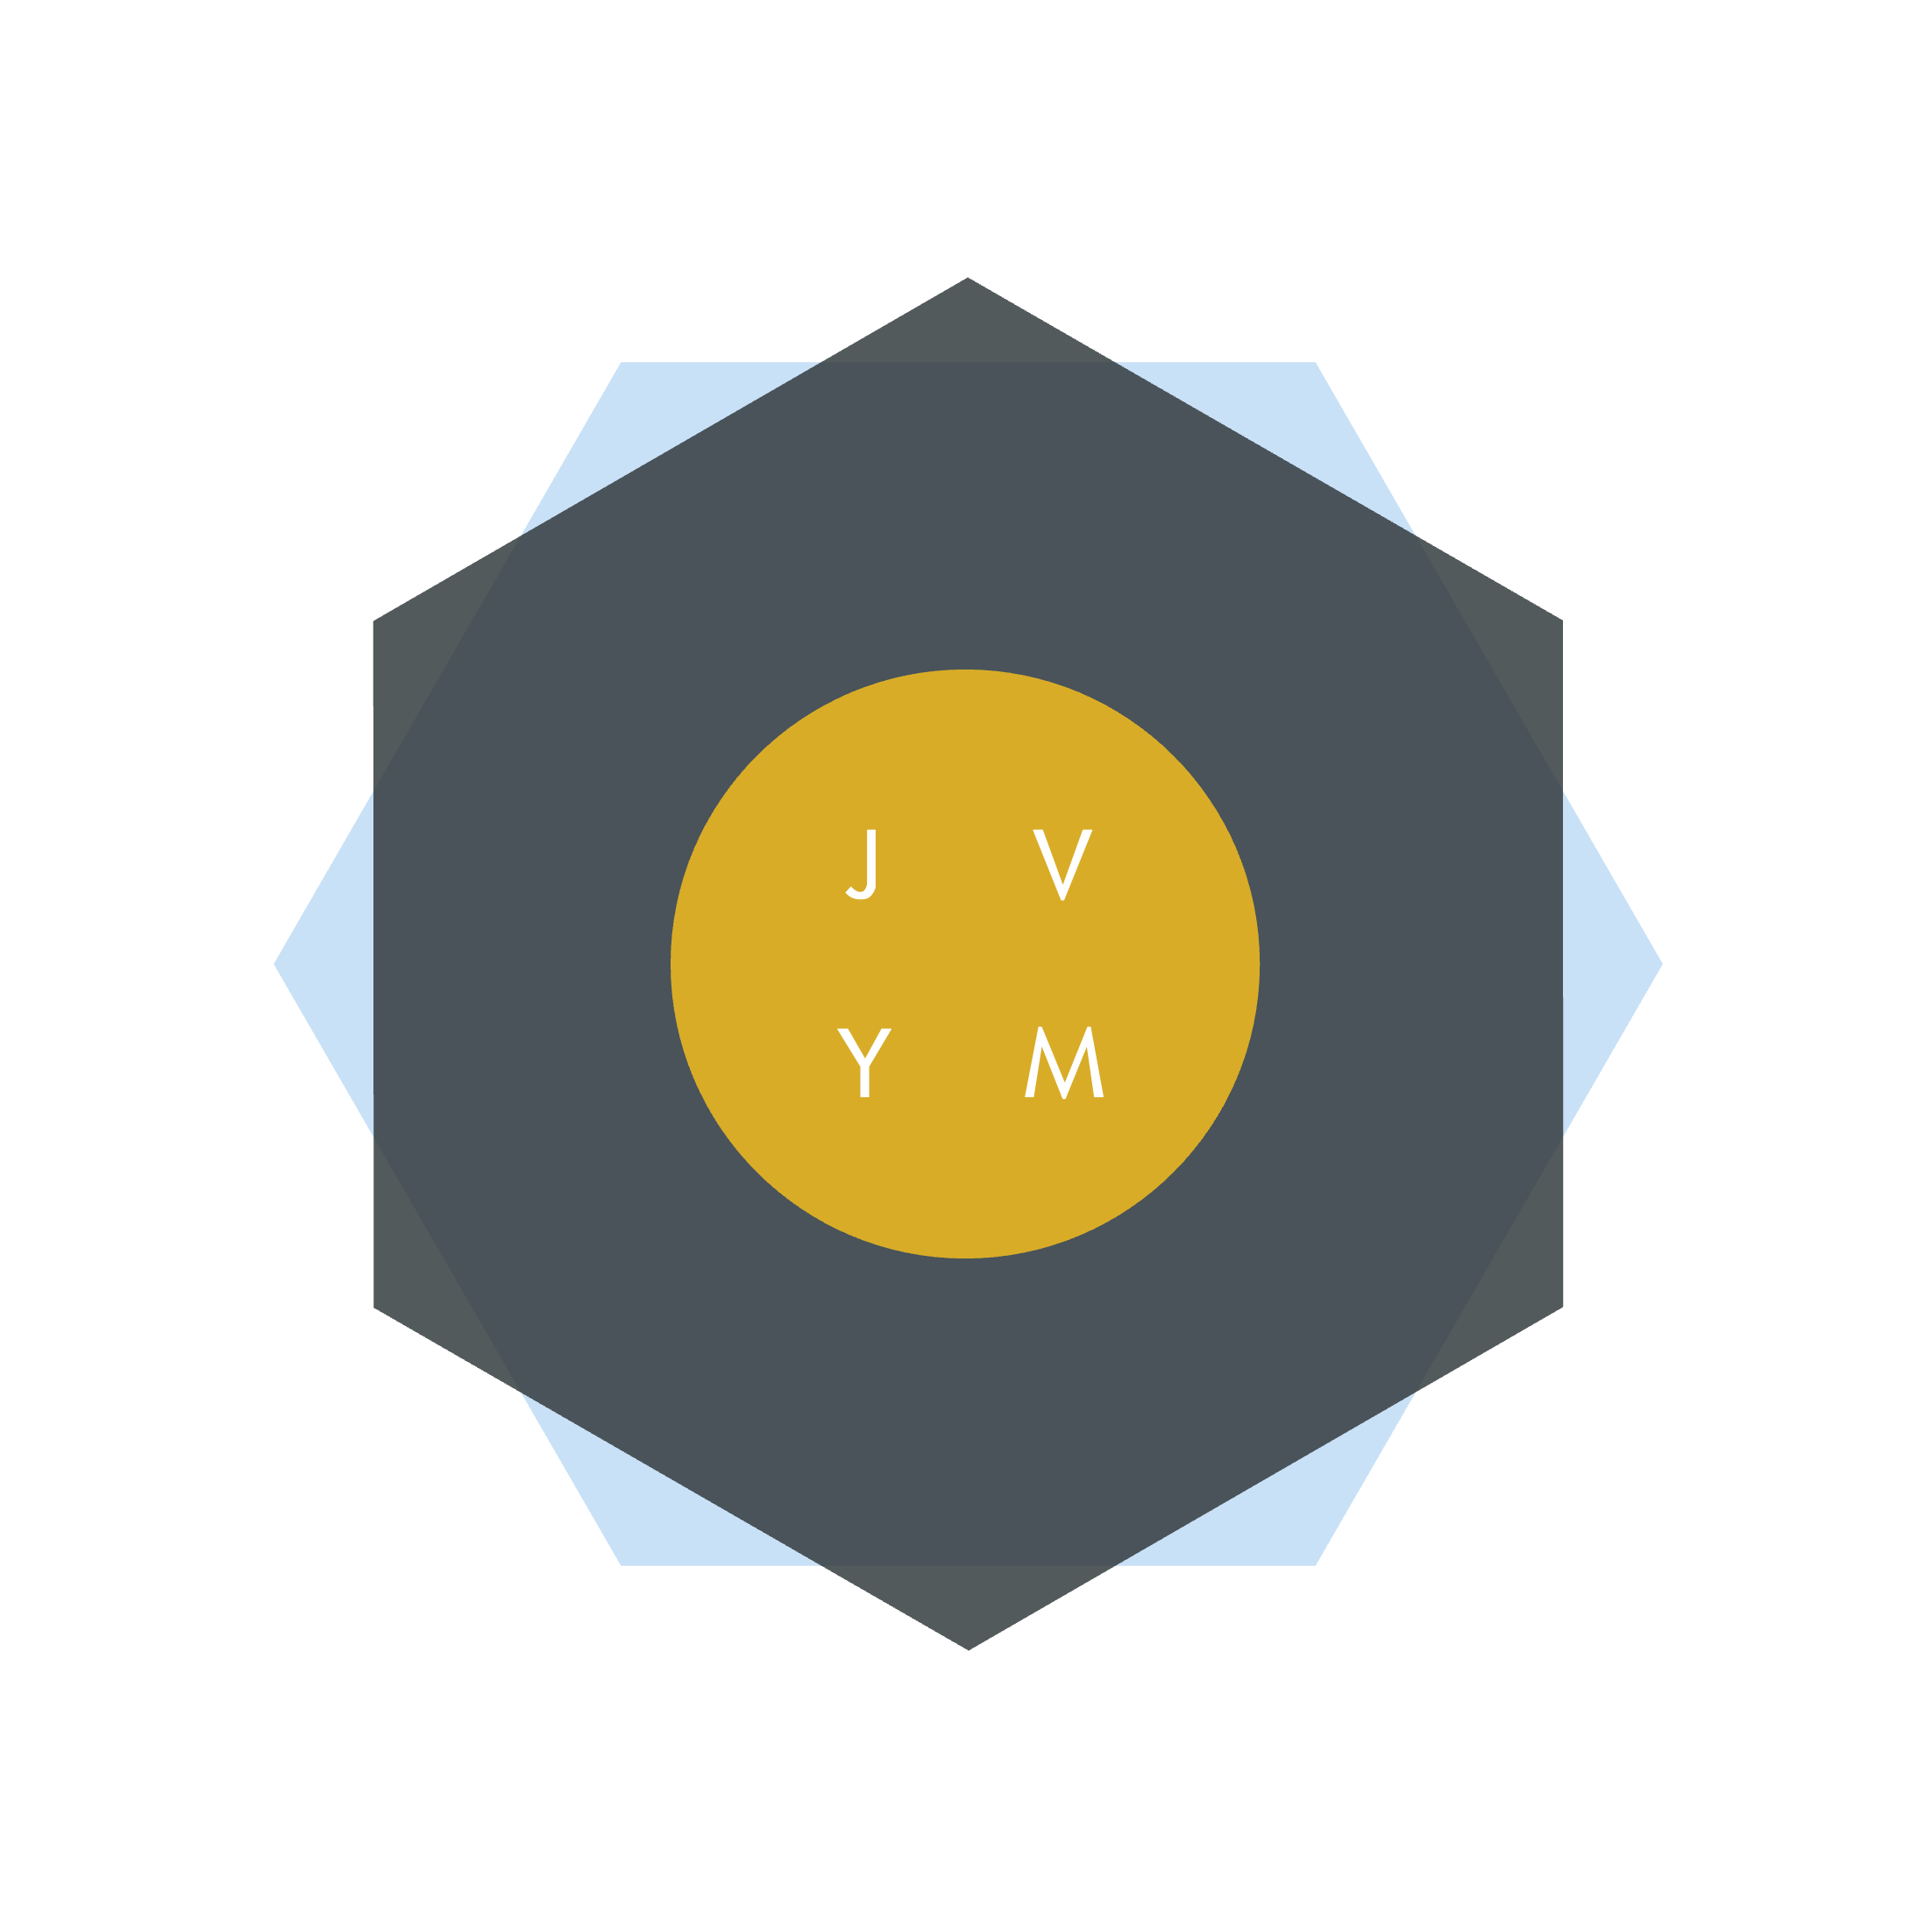 Joey Velberg Young Master logo, made up of two hexagons (one in blue, one in dark grey) with in the middle a mustard yellow circle, filled with the letters JVYM